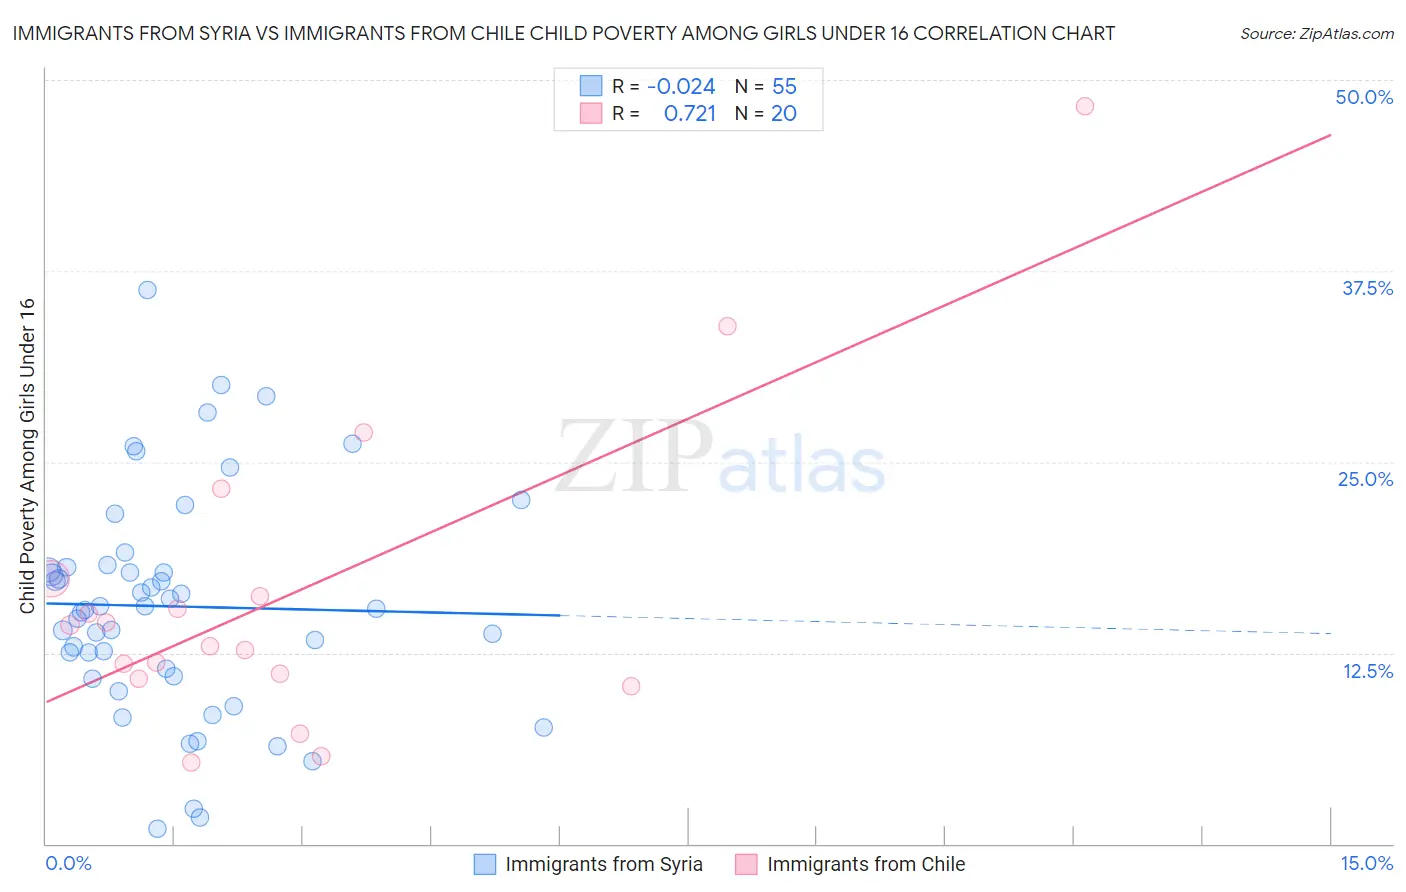 Immigrants from Syria vs Immigrants from Chile Child Poverty Among Girls Under 16